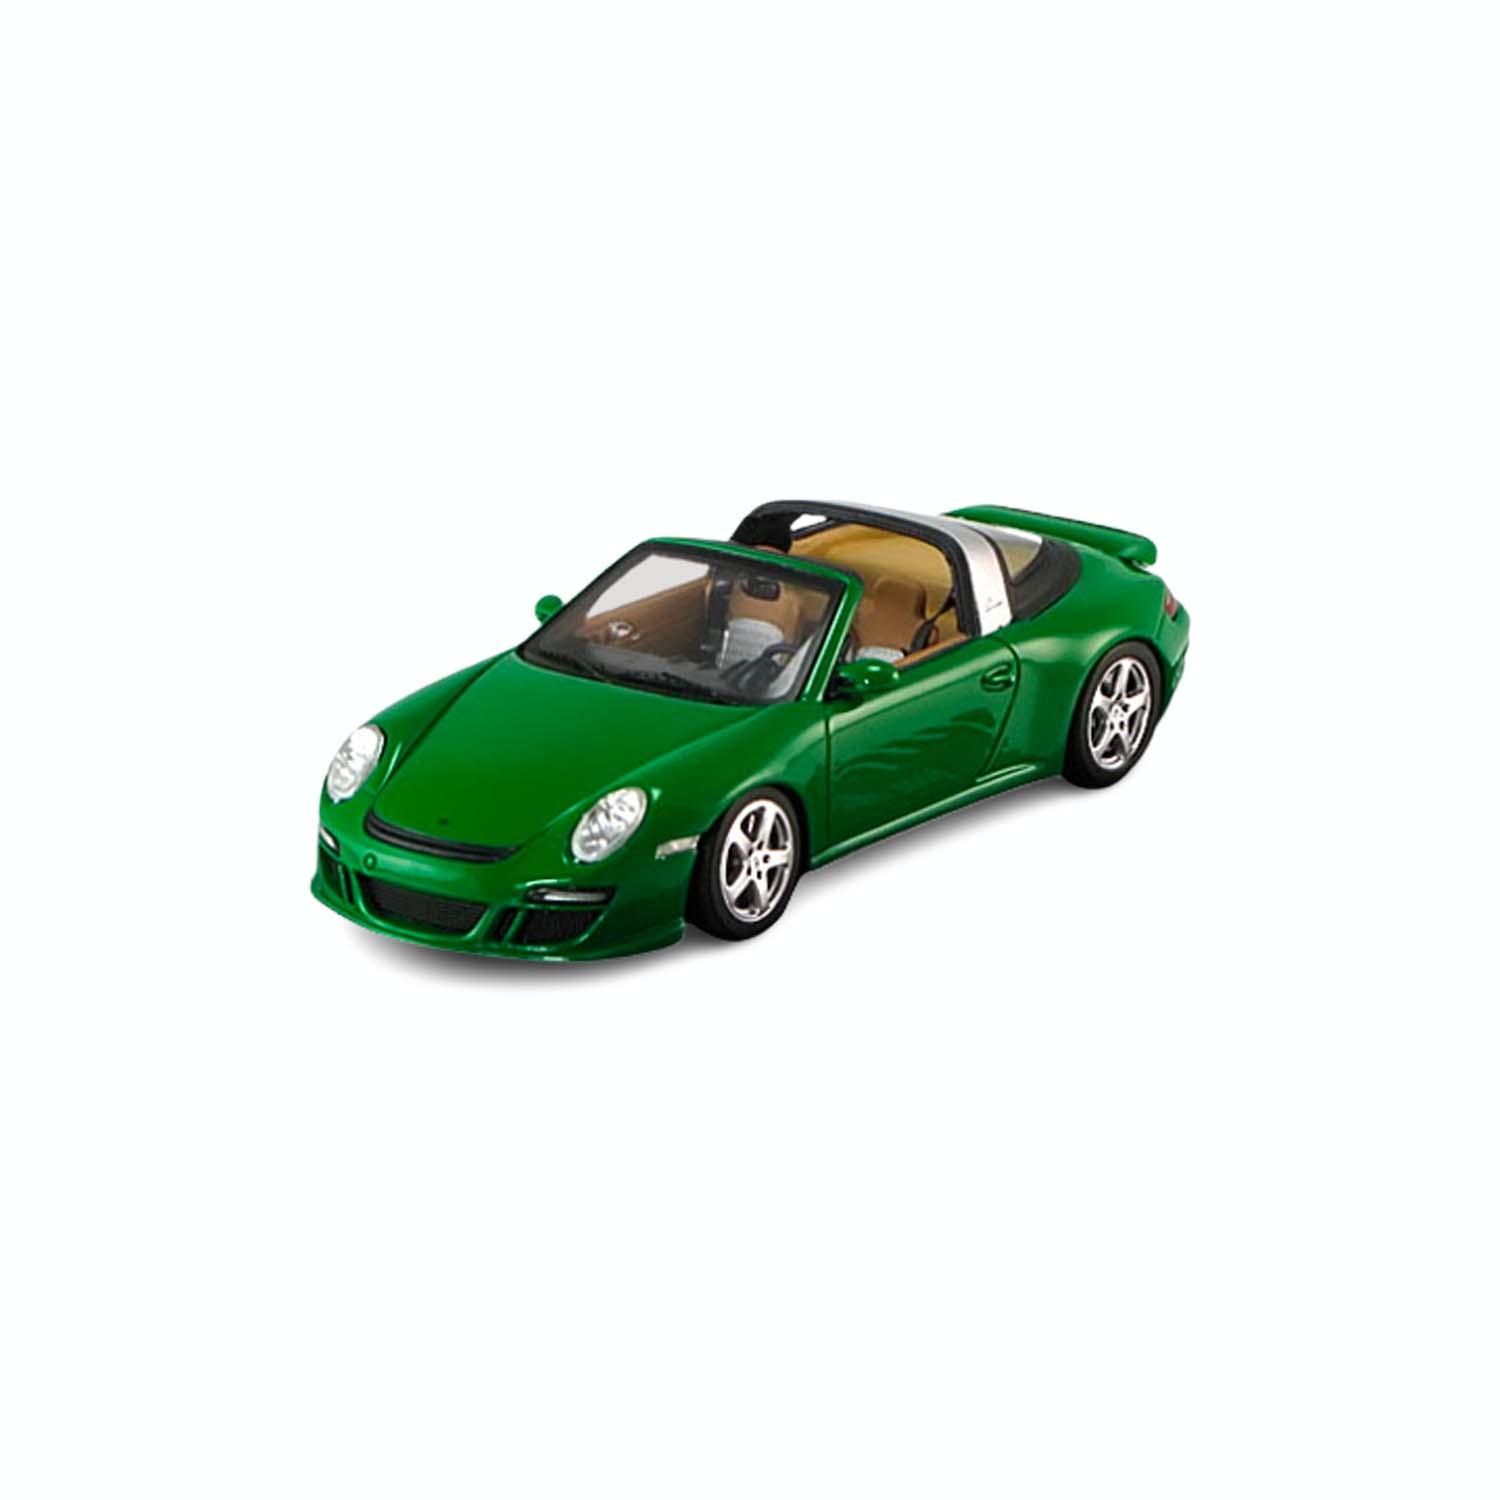 eRUF Greenster | 1:43 Scale Model-1:43 Scale Model-Spark Models-gpx-store